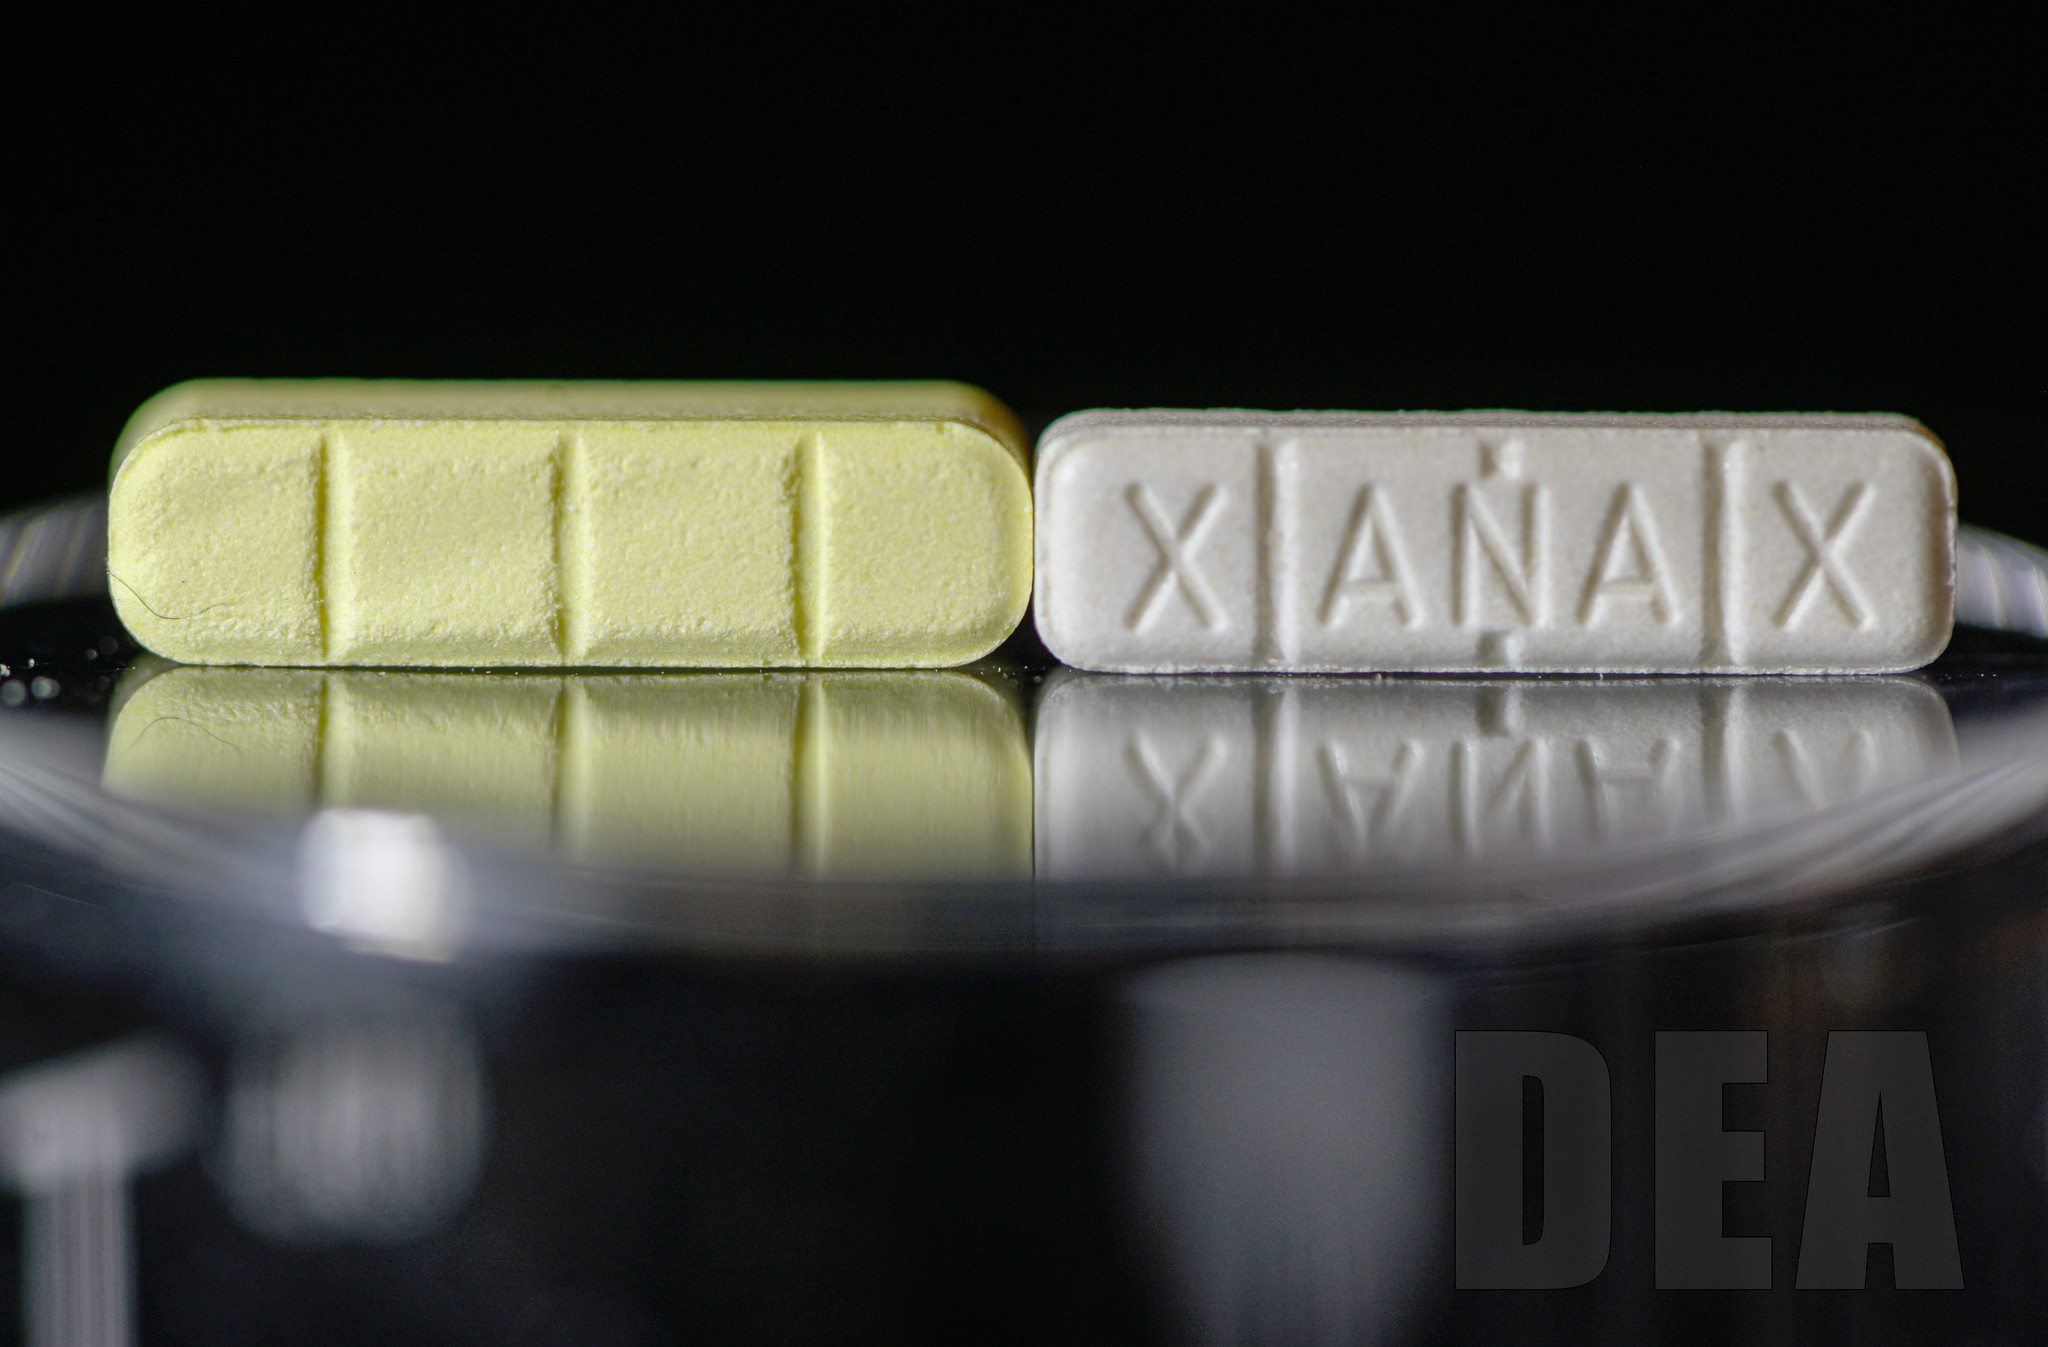 xanax compared to counterfeit